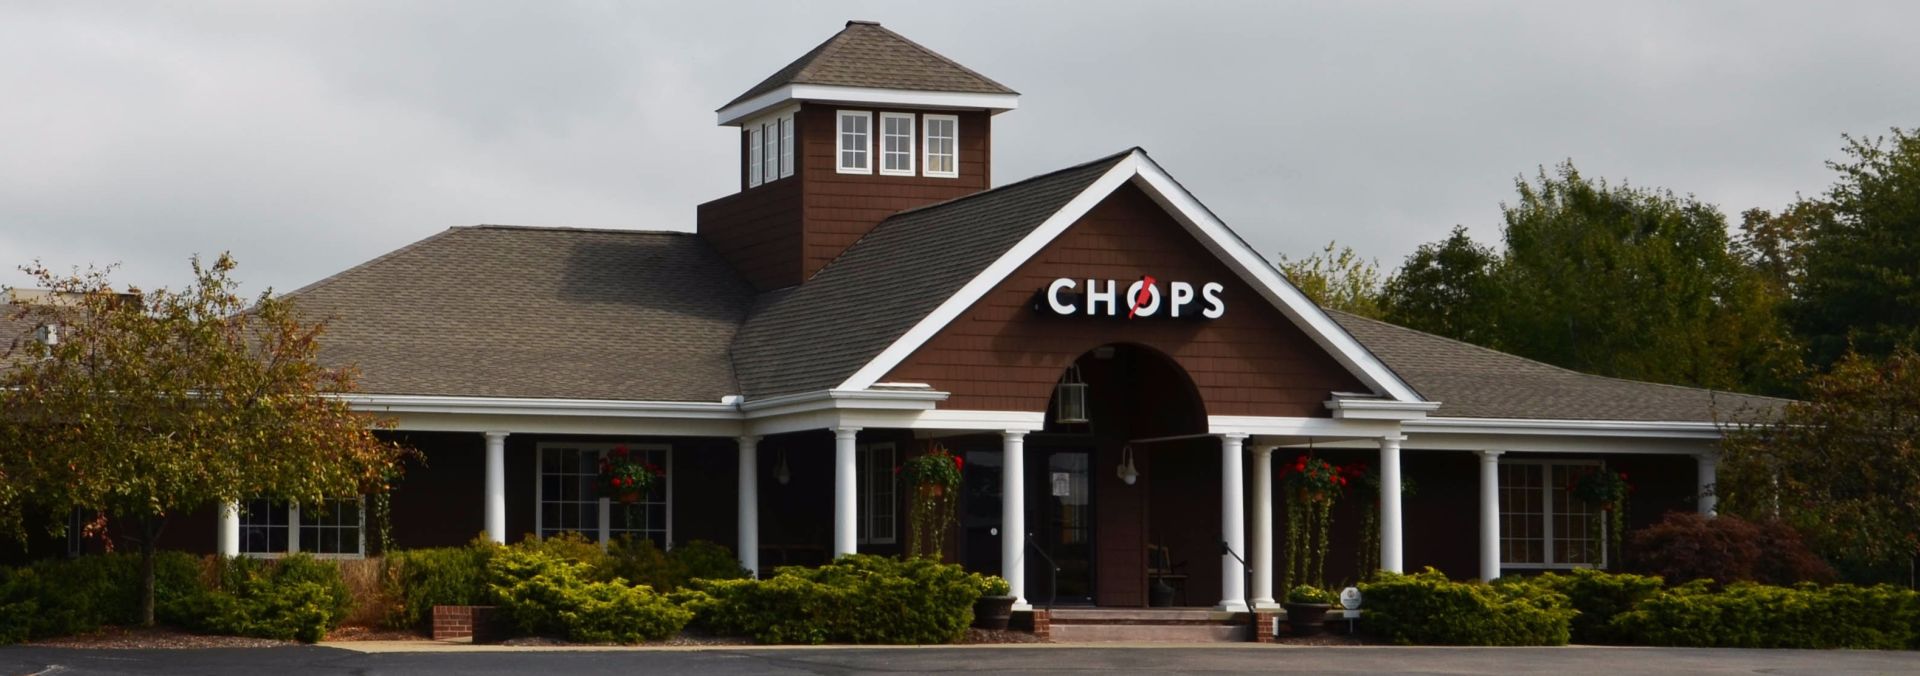 Chops &#8211; Successful Restaurant Business for Sale &#8211; *REDUCED!*